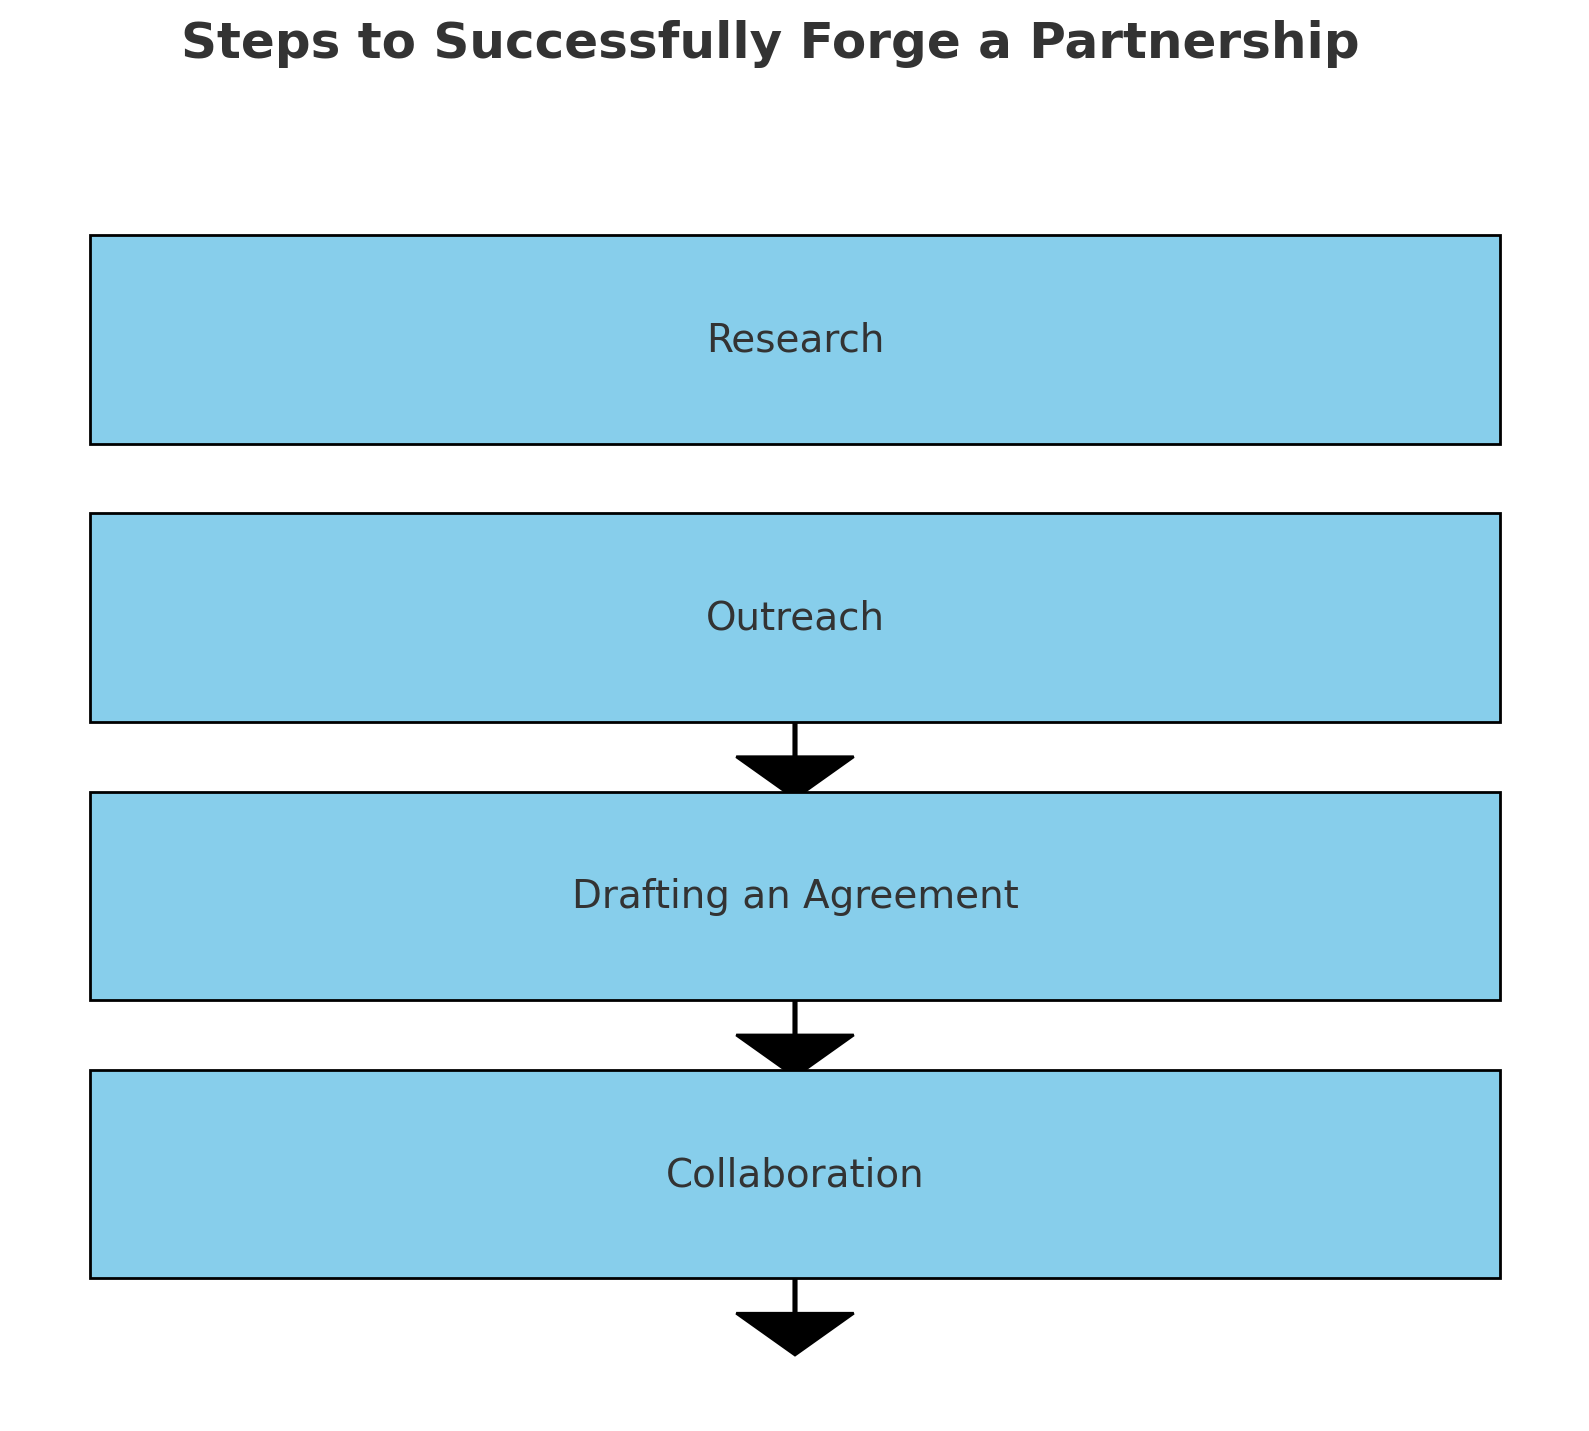 Steps to begin a partnership